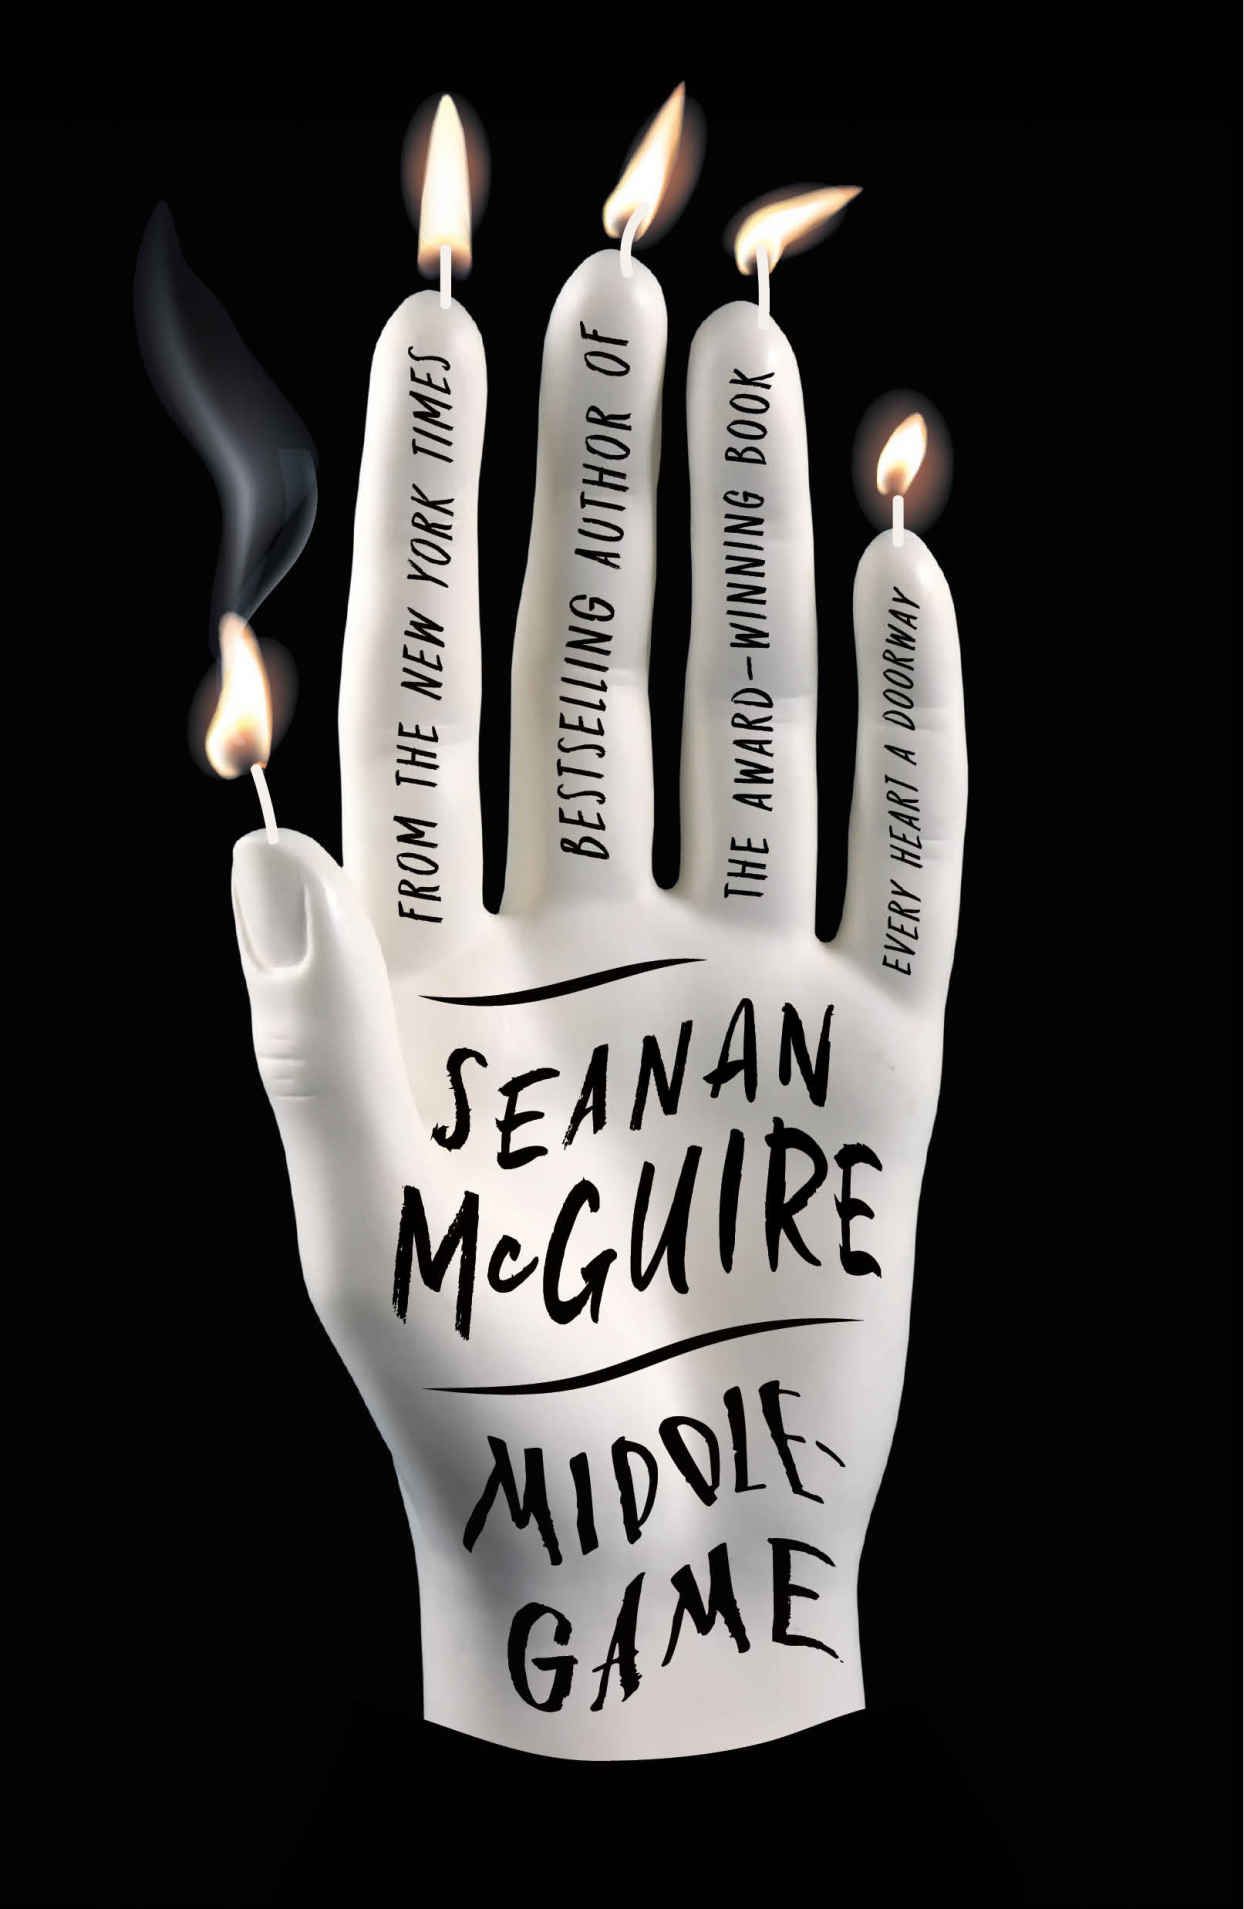 middlegame mcguire